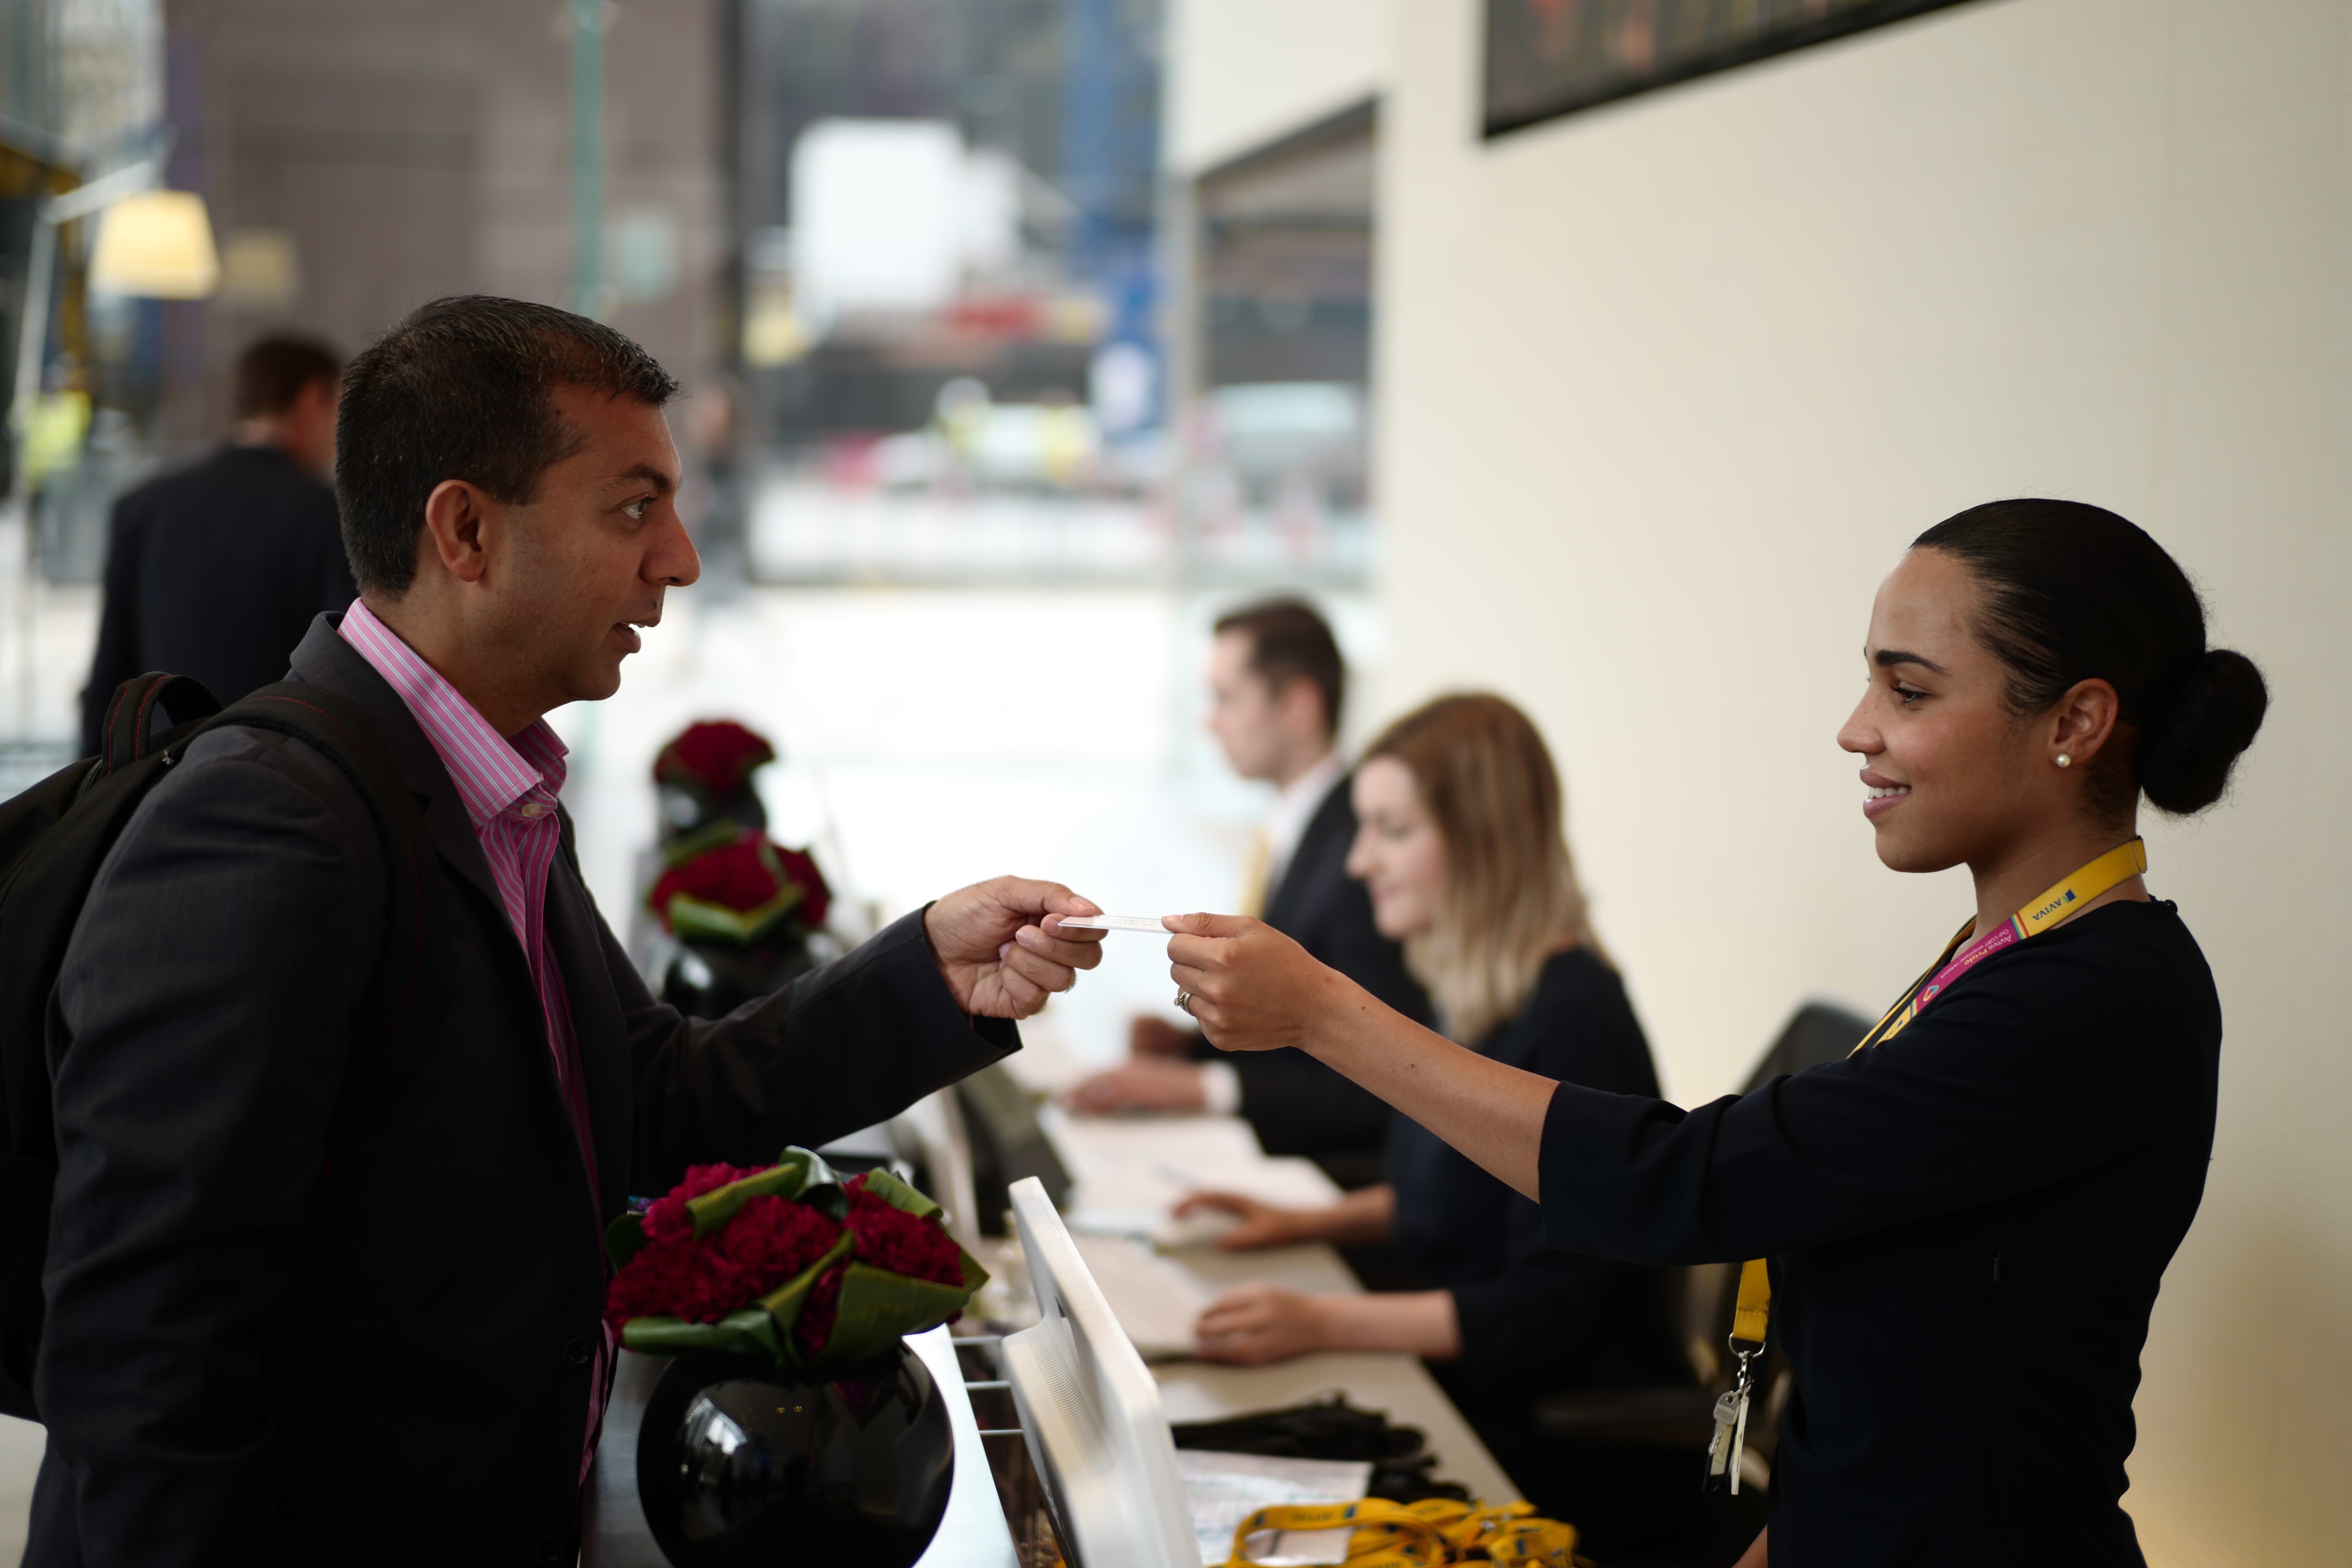 Man receiving guest pass from woman behind counter at Aviva London headquarters